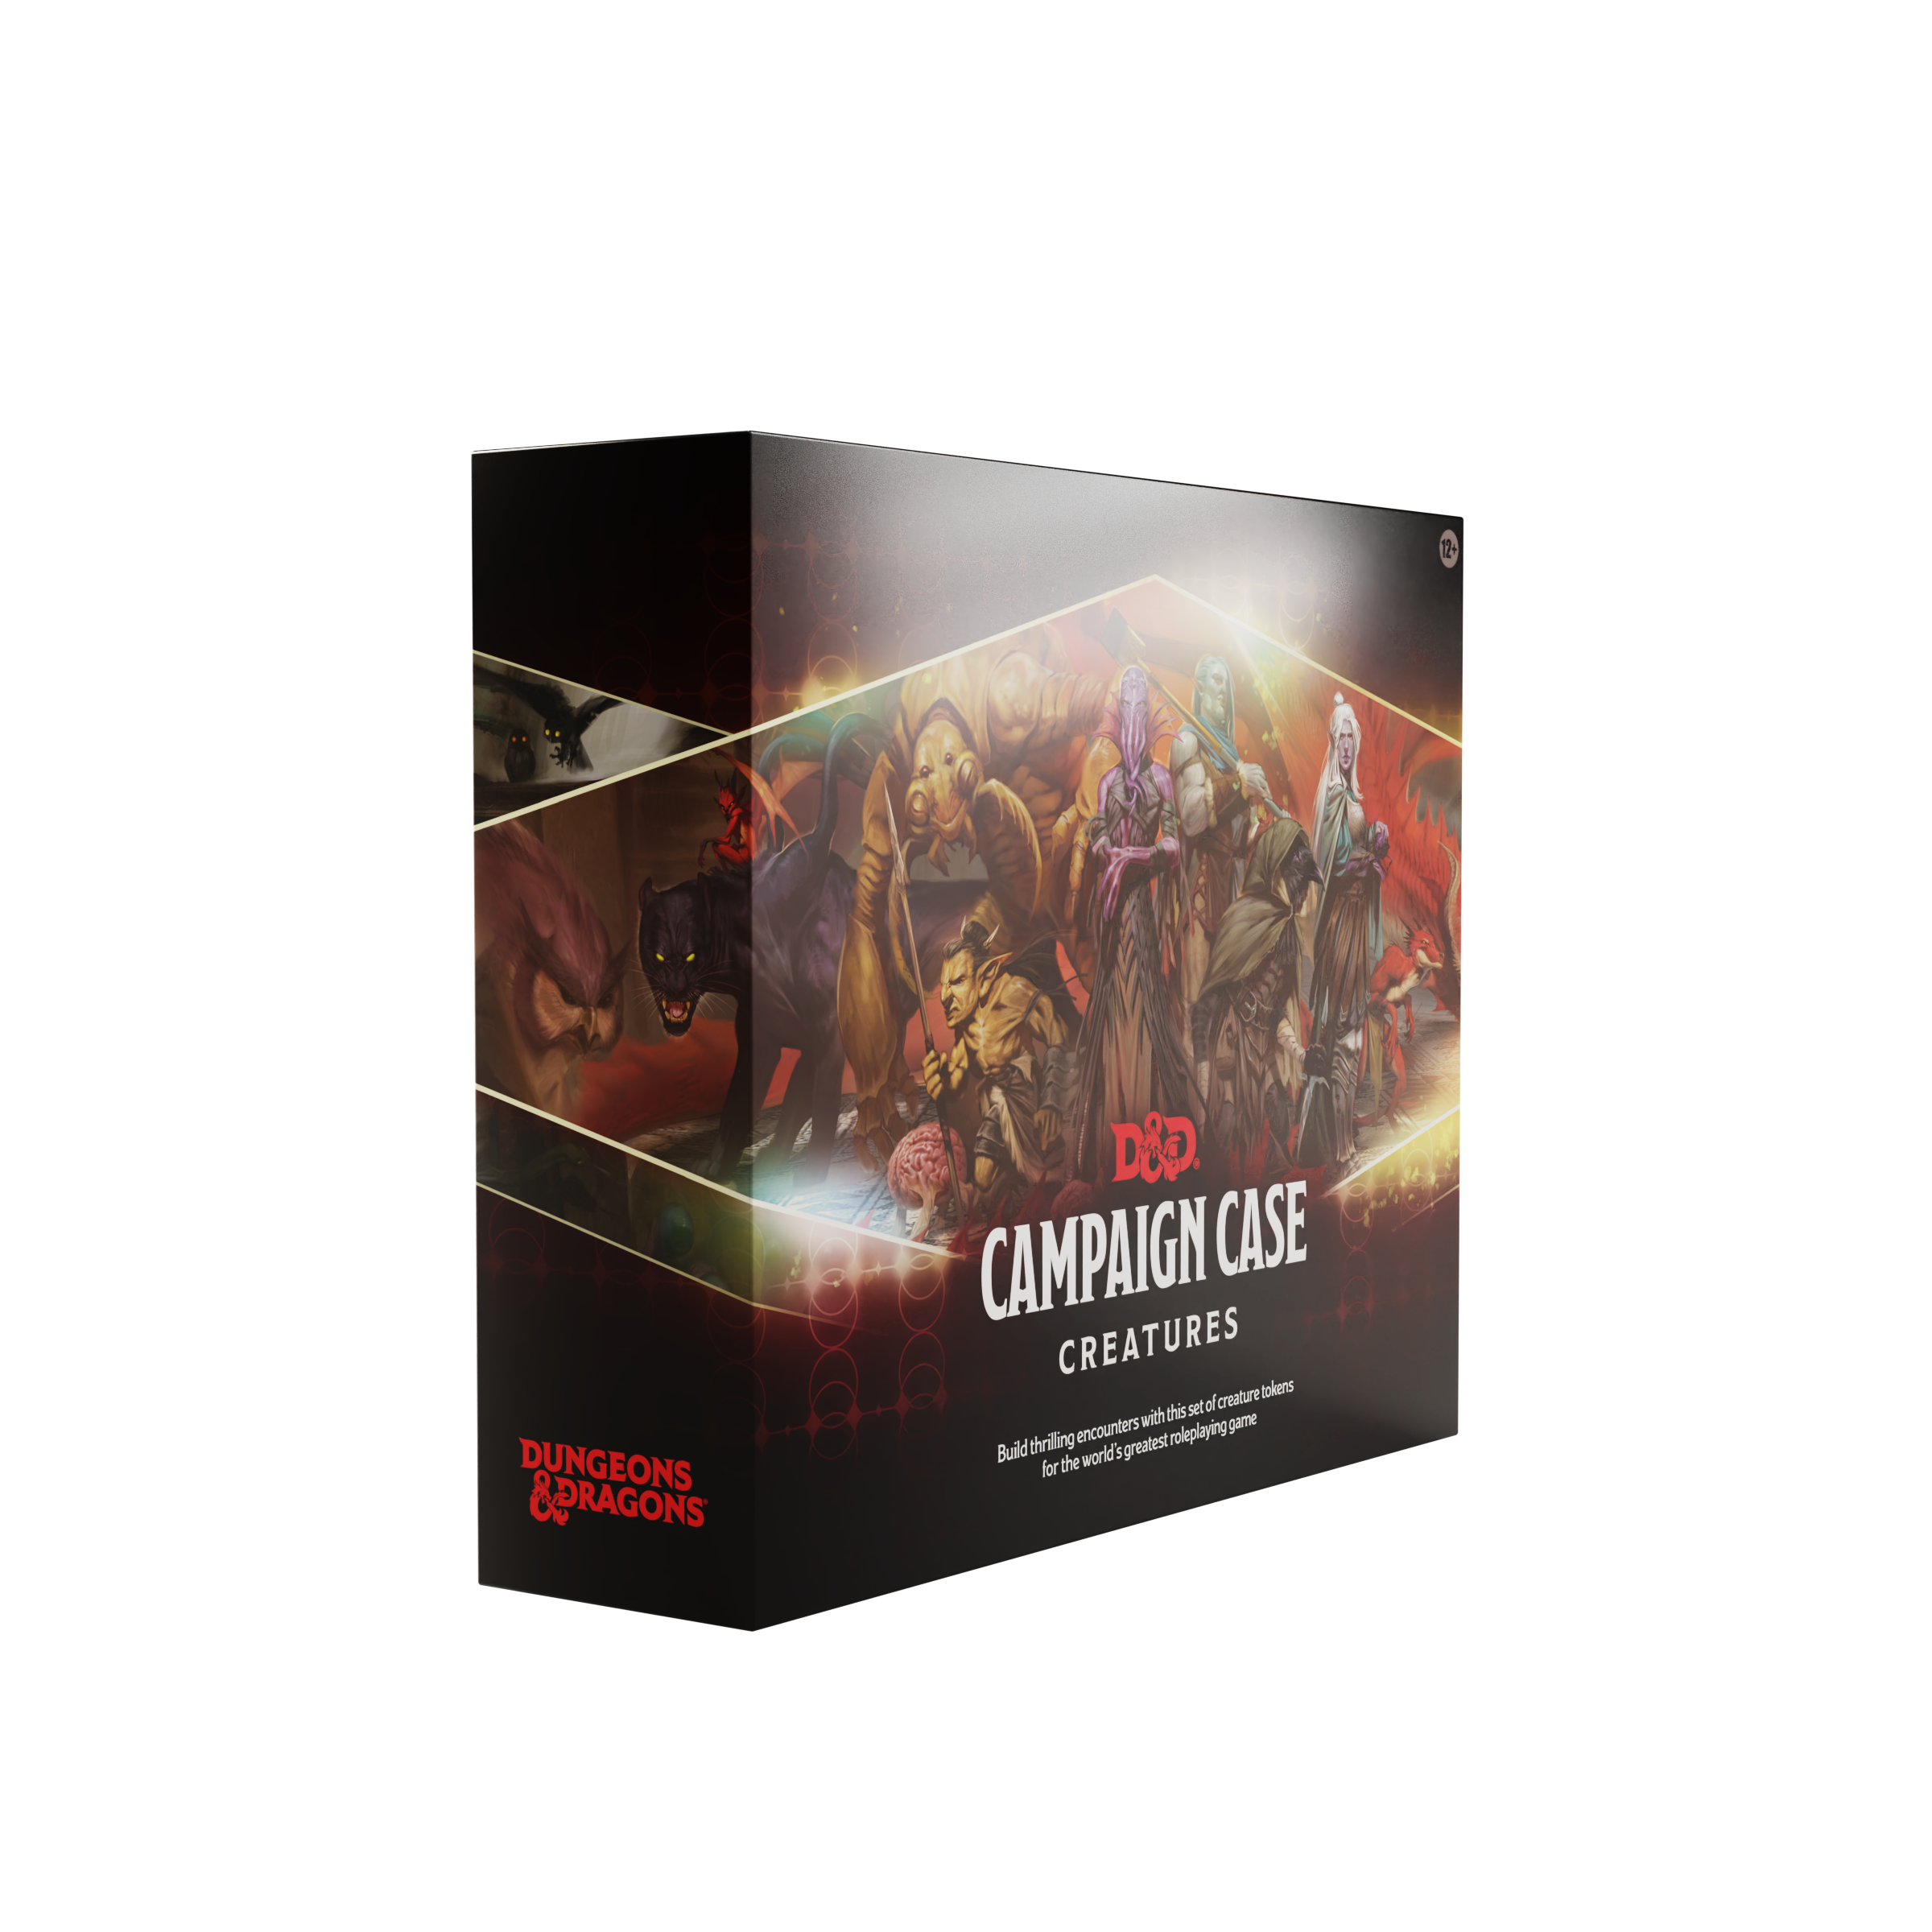 D&D Campaign Cases with maps and creature tokens arrive in July